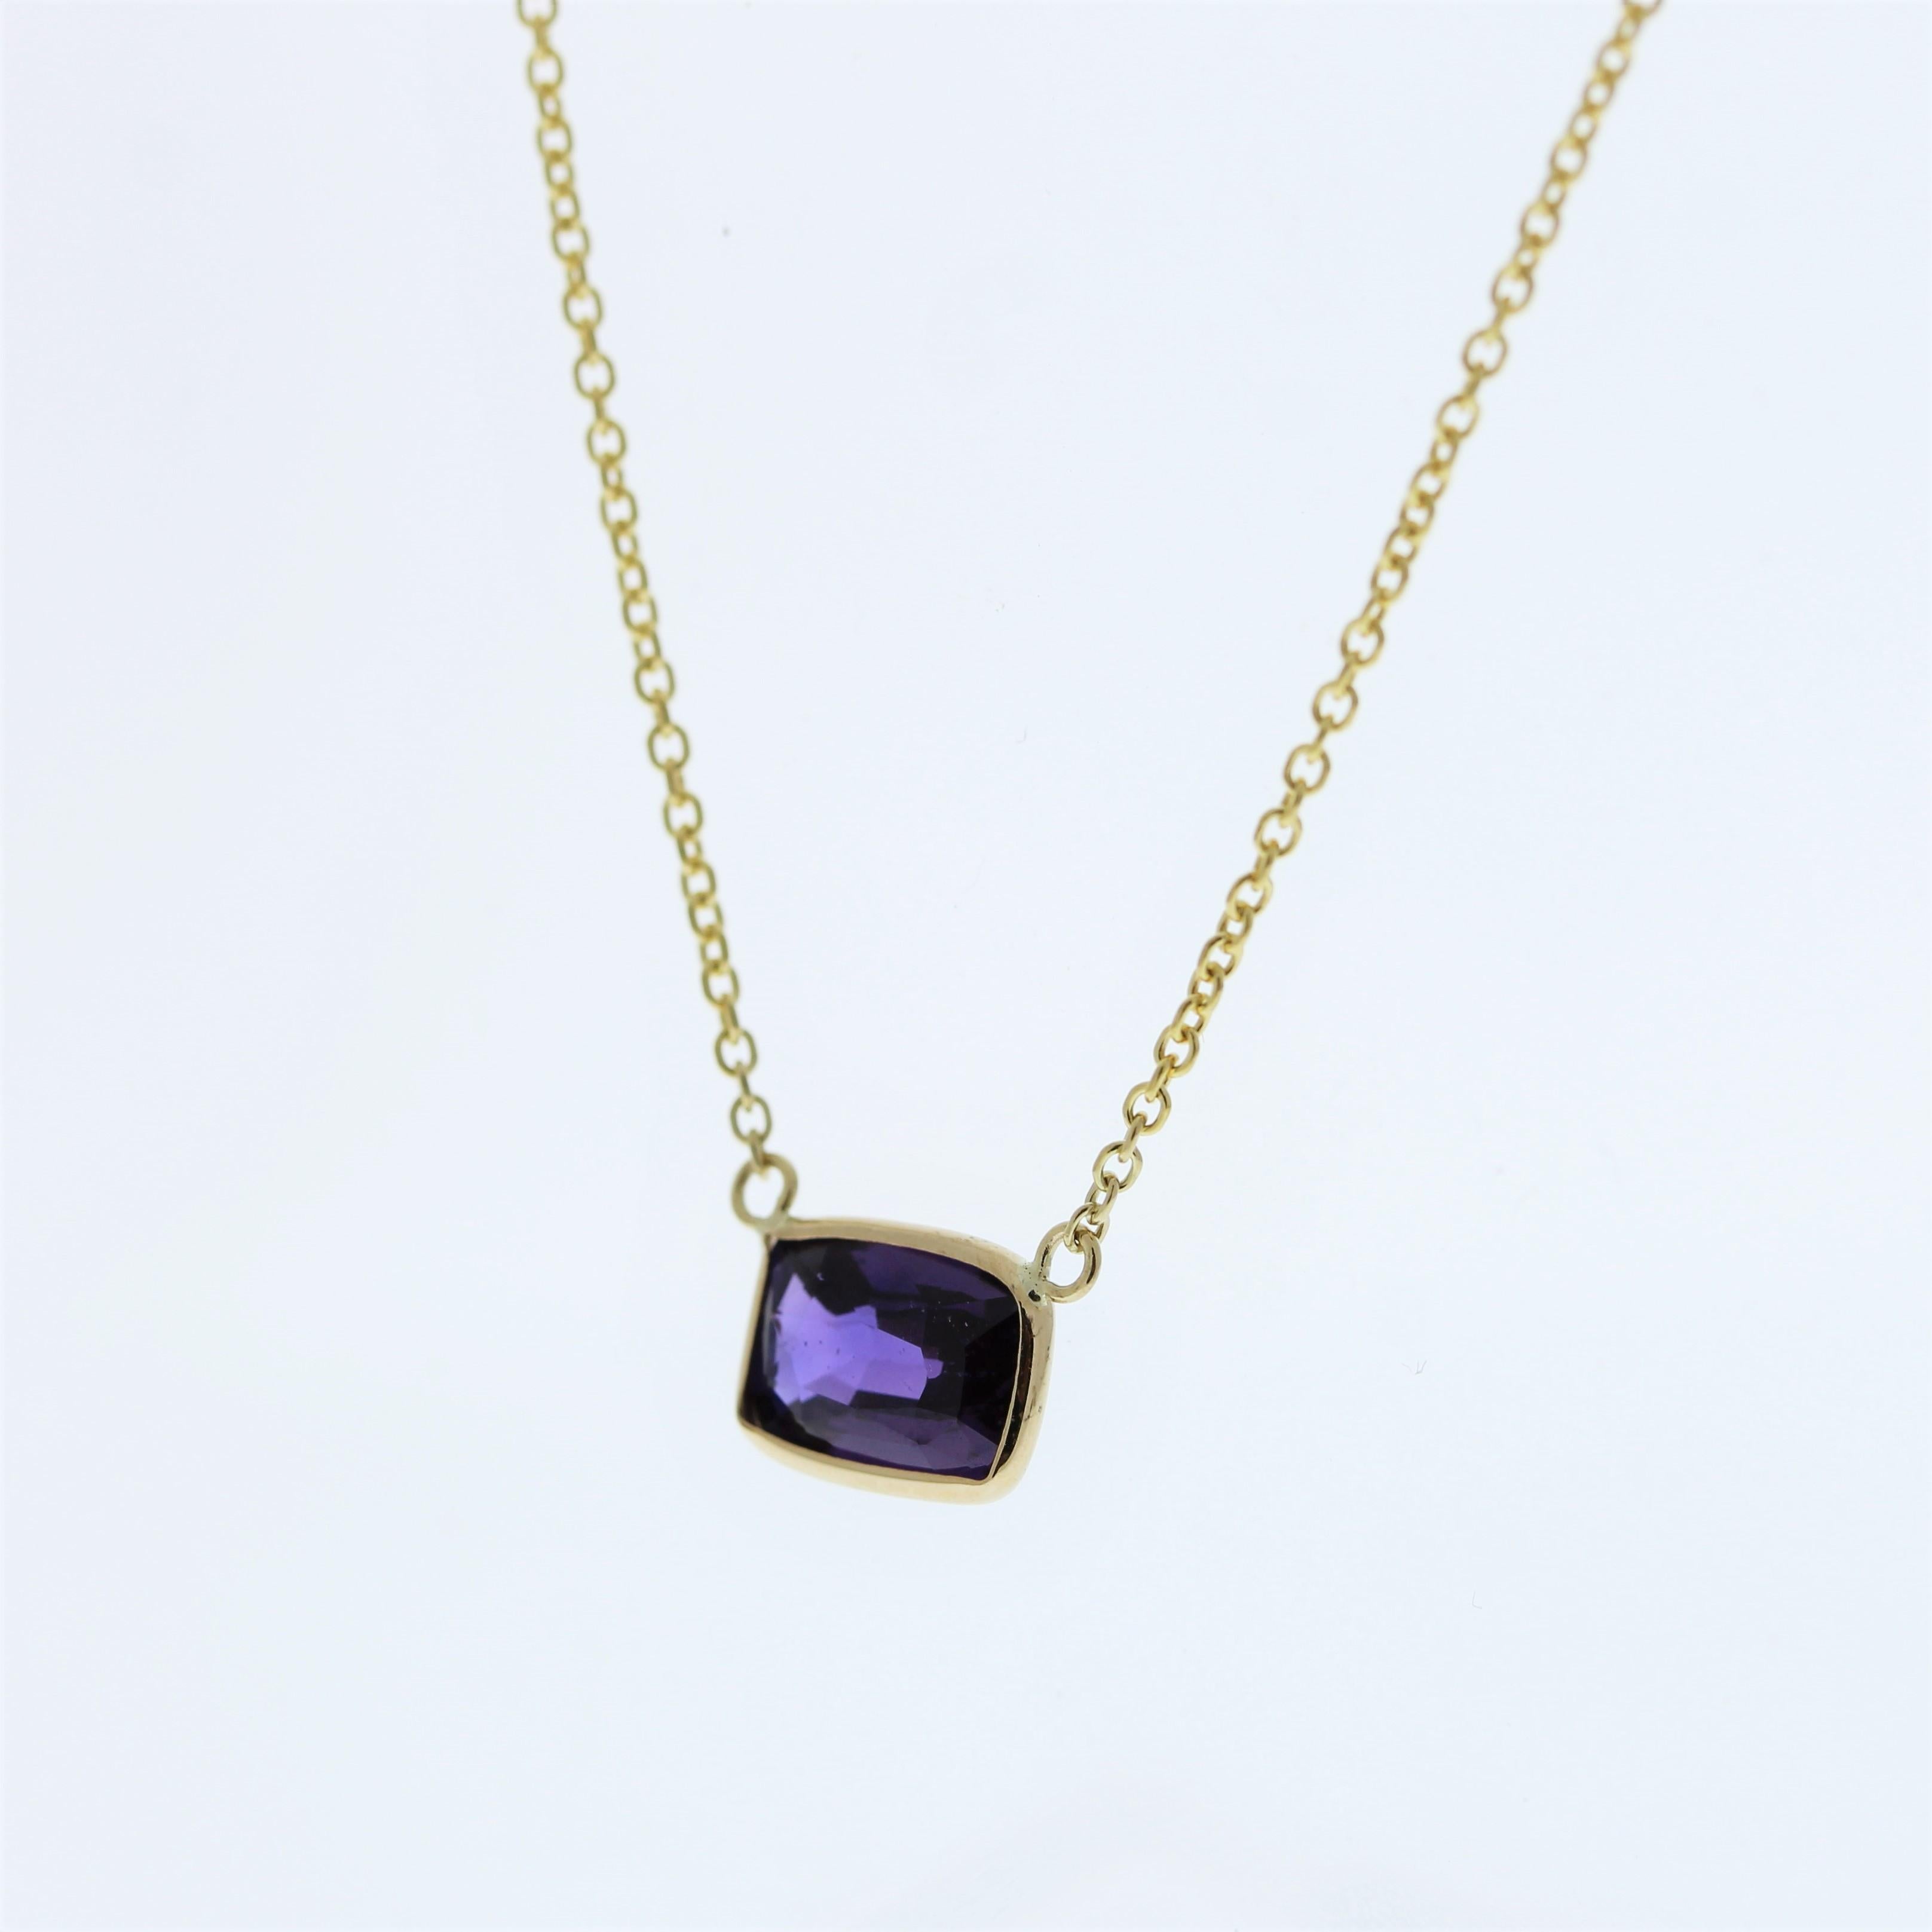 Cushion Cut 1.97 Carat Cushion Sapphire Purple Fashion Necklaces In 14k Yellow Gold For Sale